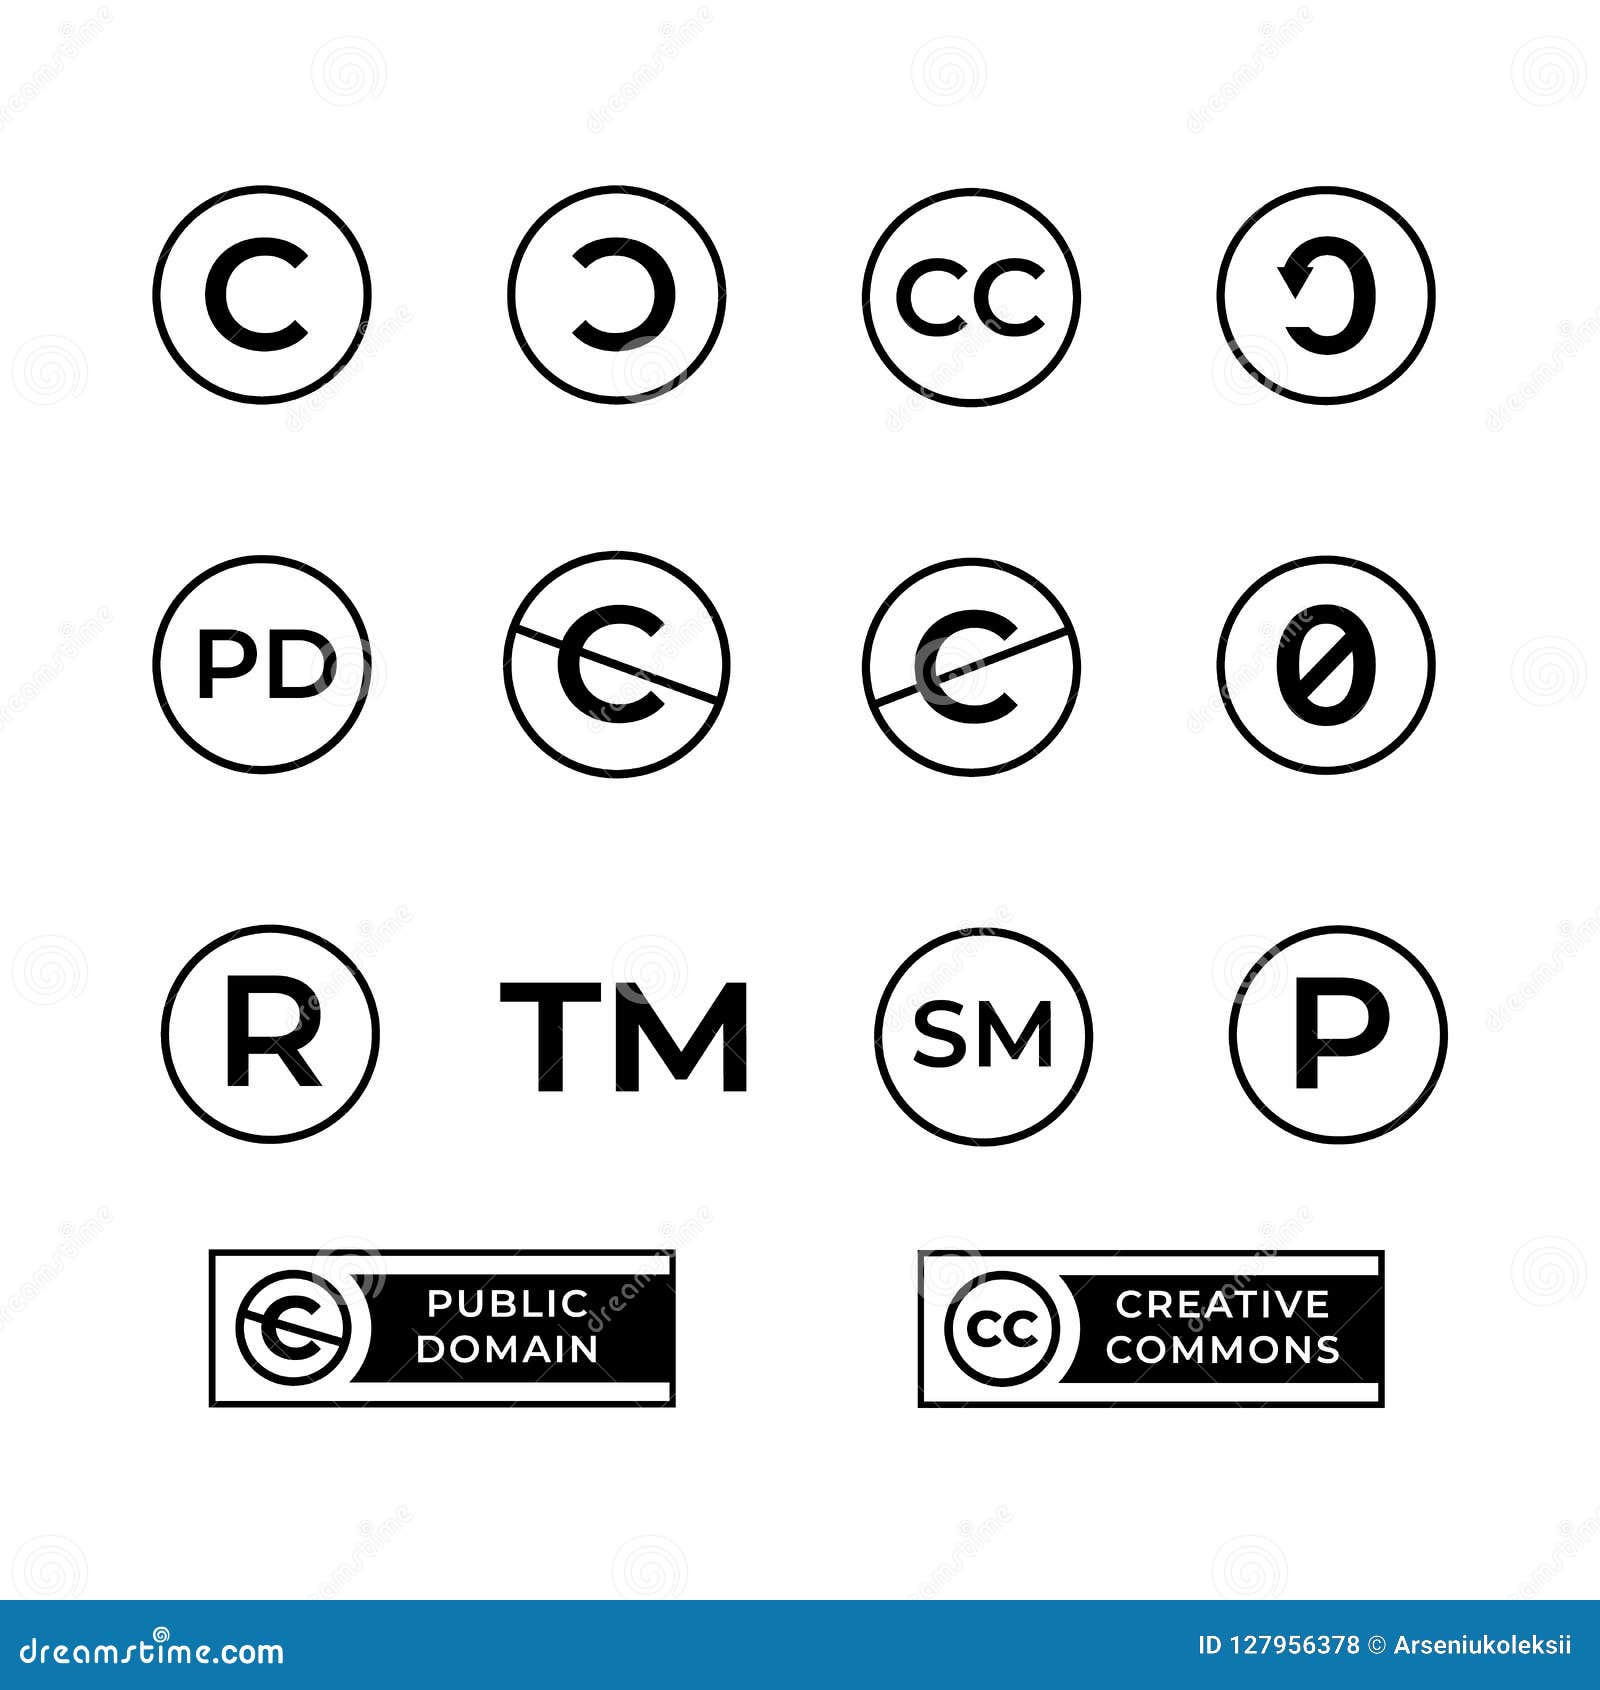 different copyright icons set with creative commons and public domain signs.